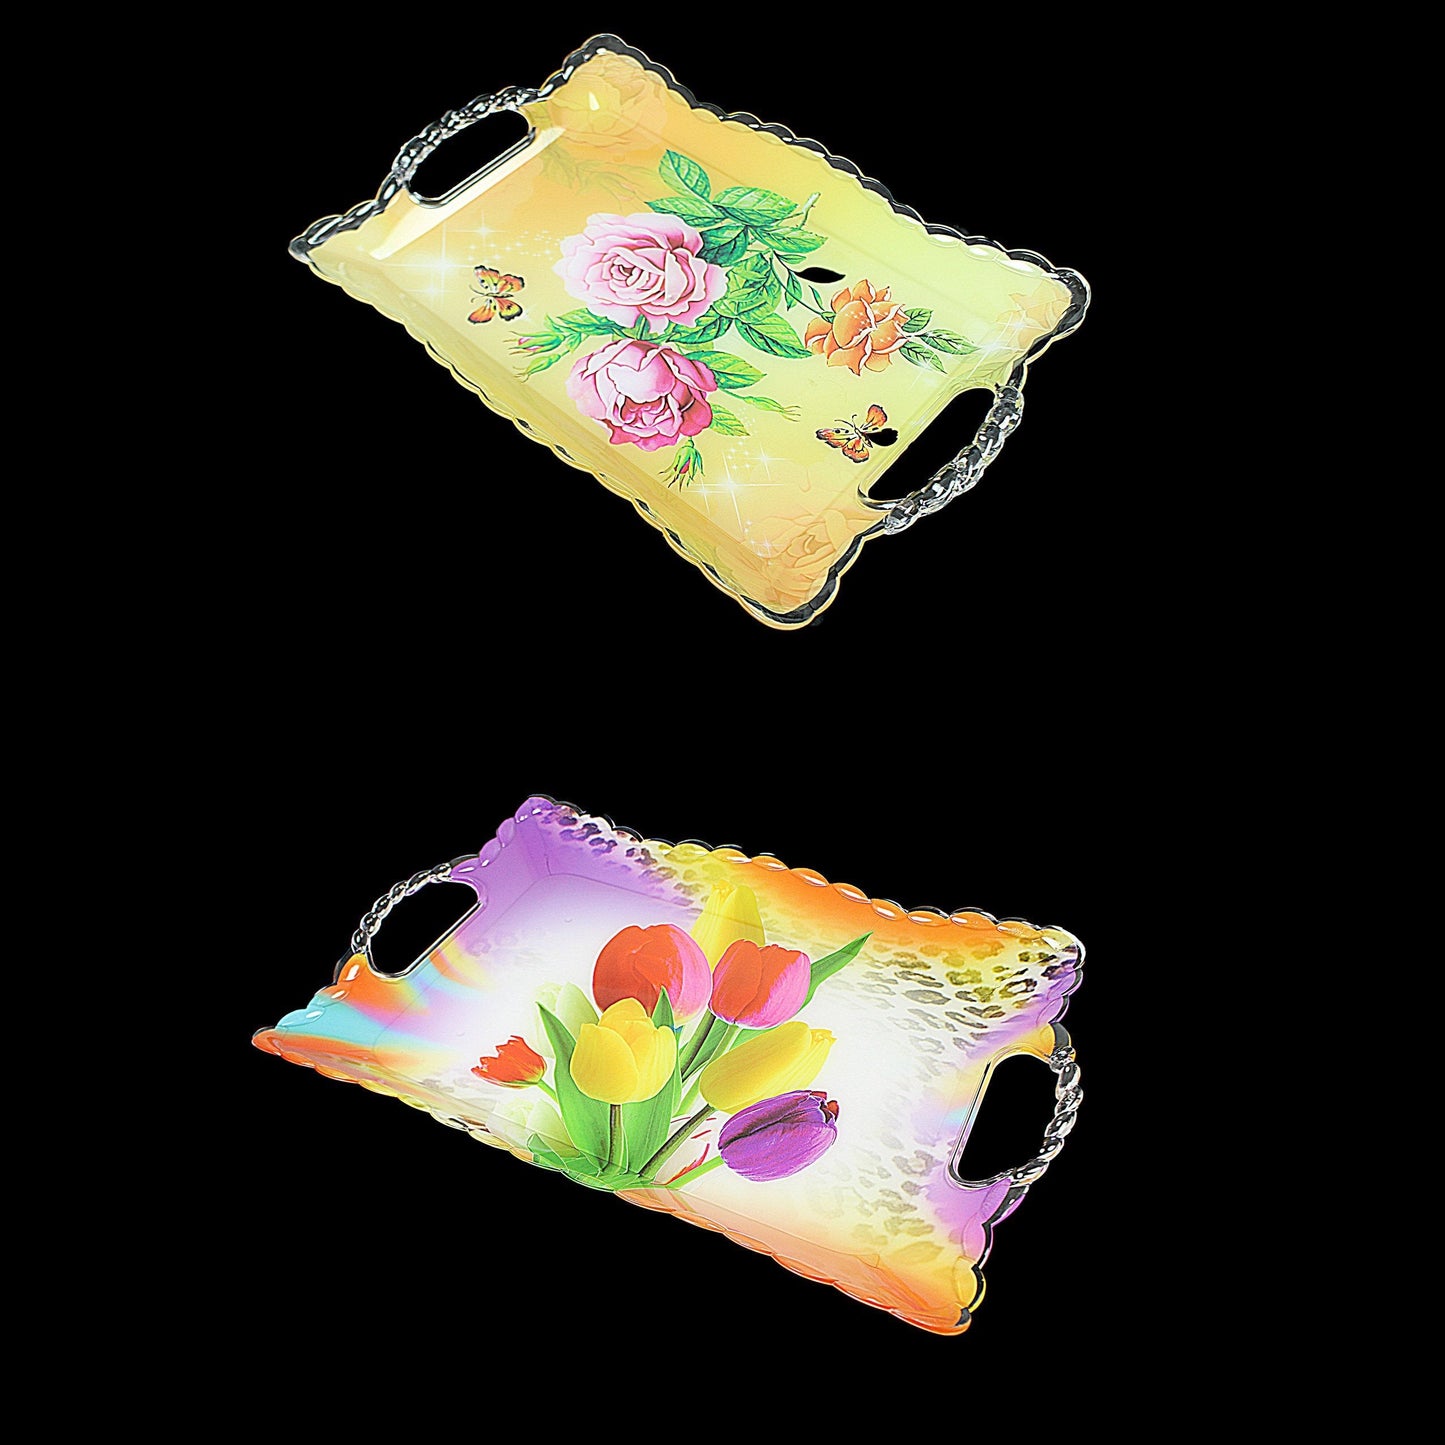 Plastic Floral Printed Serving Tray 40cm x 25cm Assorted Colours and Designs 0727 (Parcel Rate)